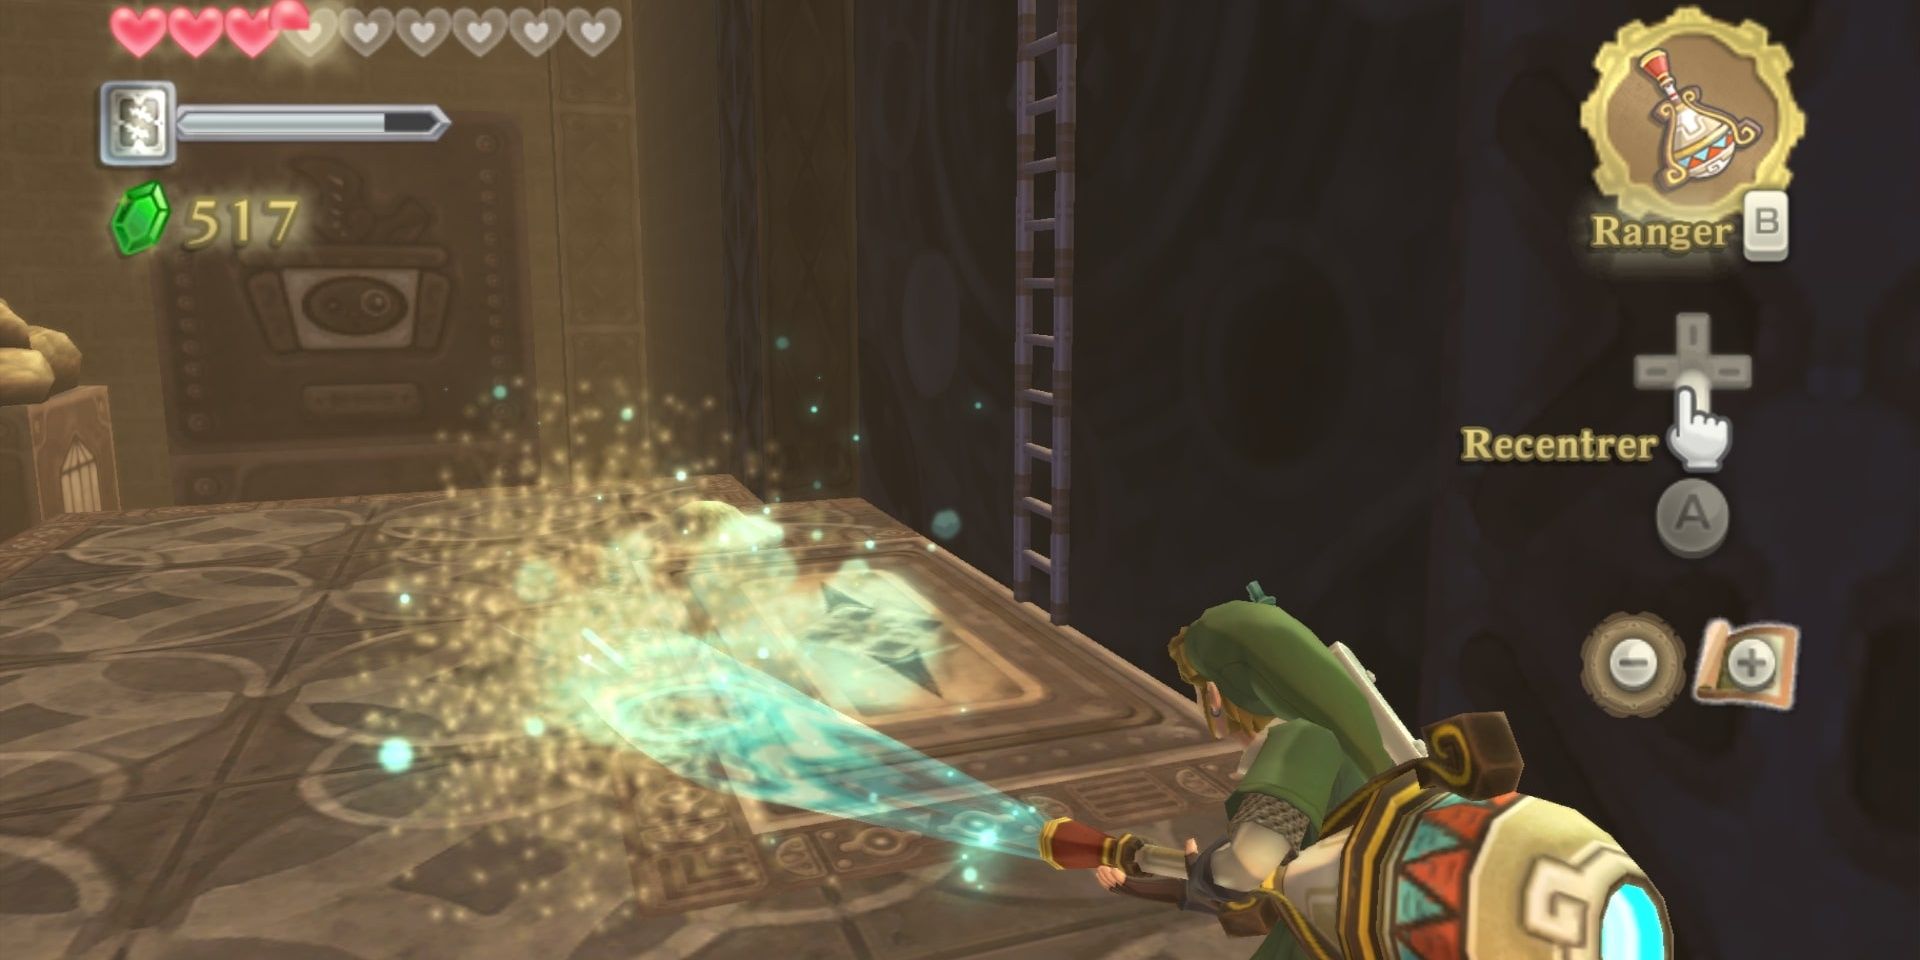 Skyward Sword Gust Bellows being used by Link to blow sand